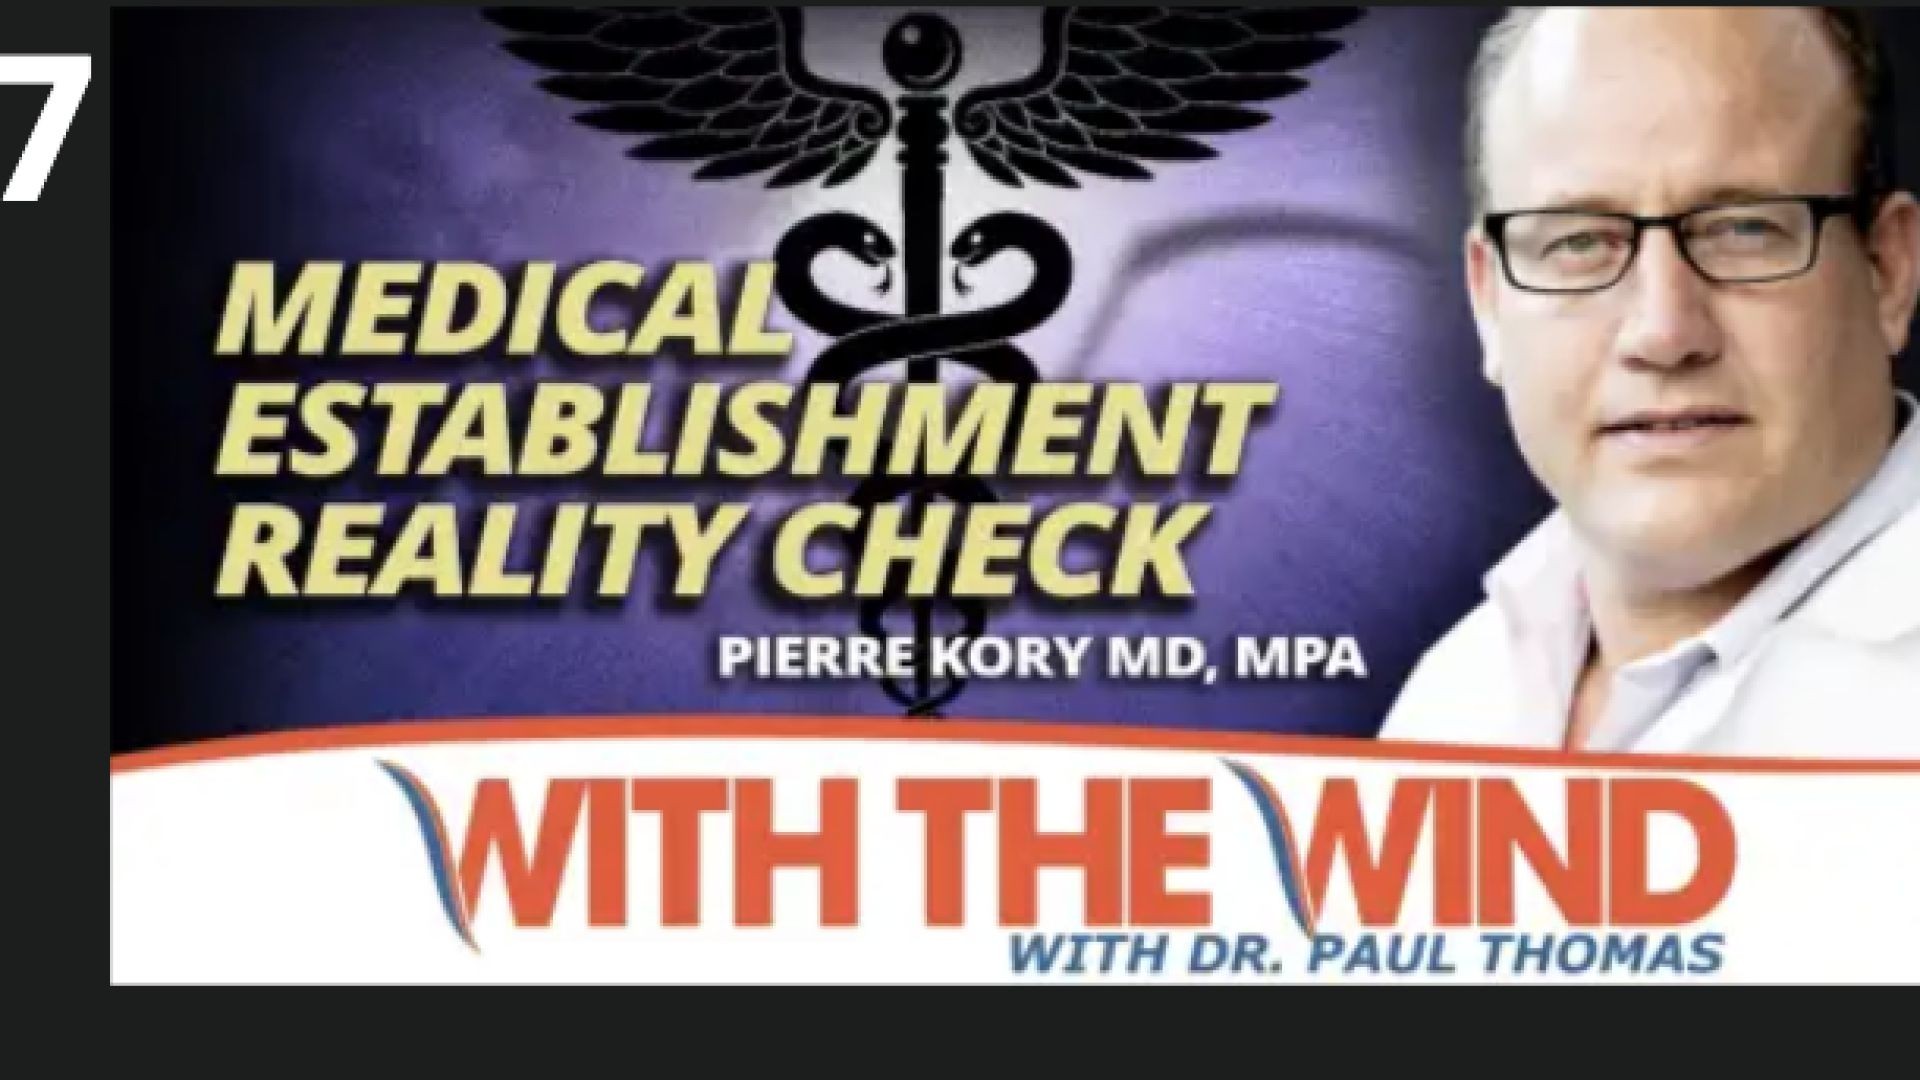 Medical Establishment Reality Check With Pierre Kory M.D., M.P.A. (link below)